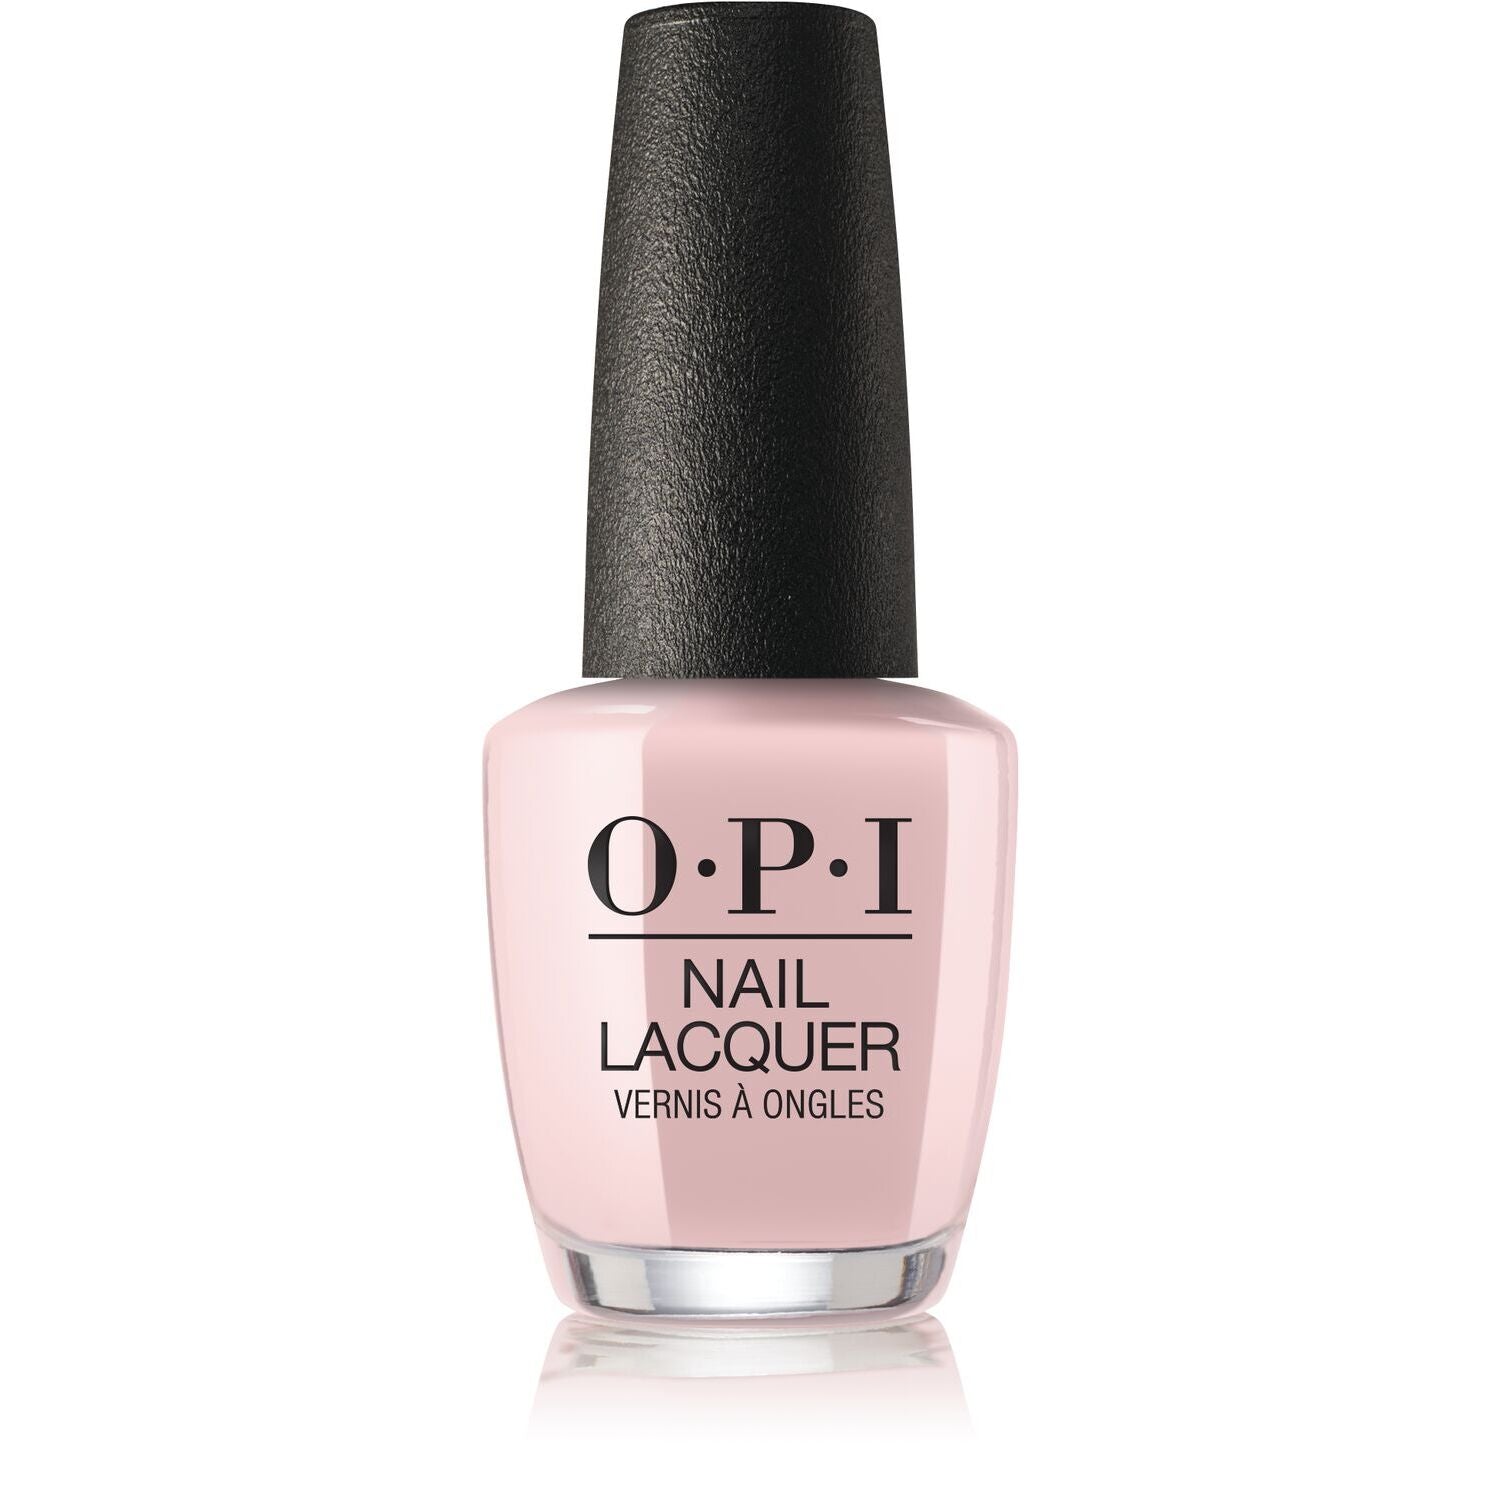 OPI Bare My Soul Nail Lacquer